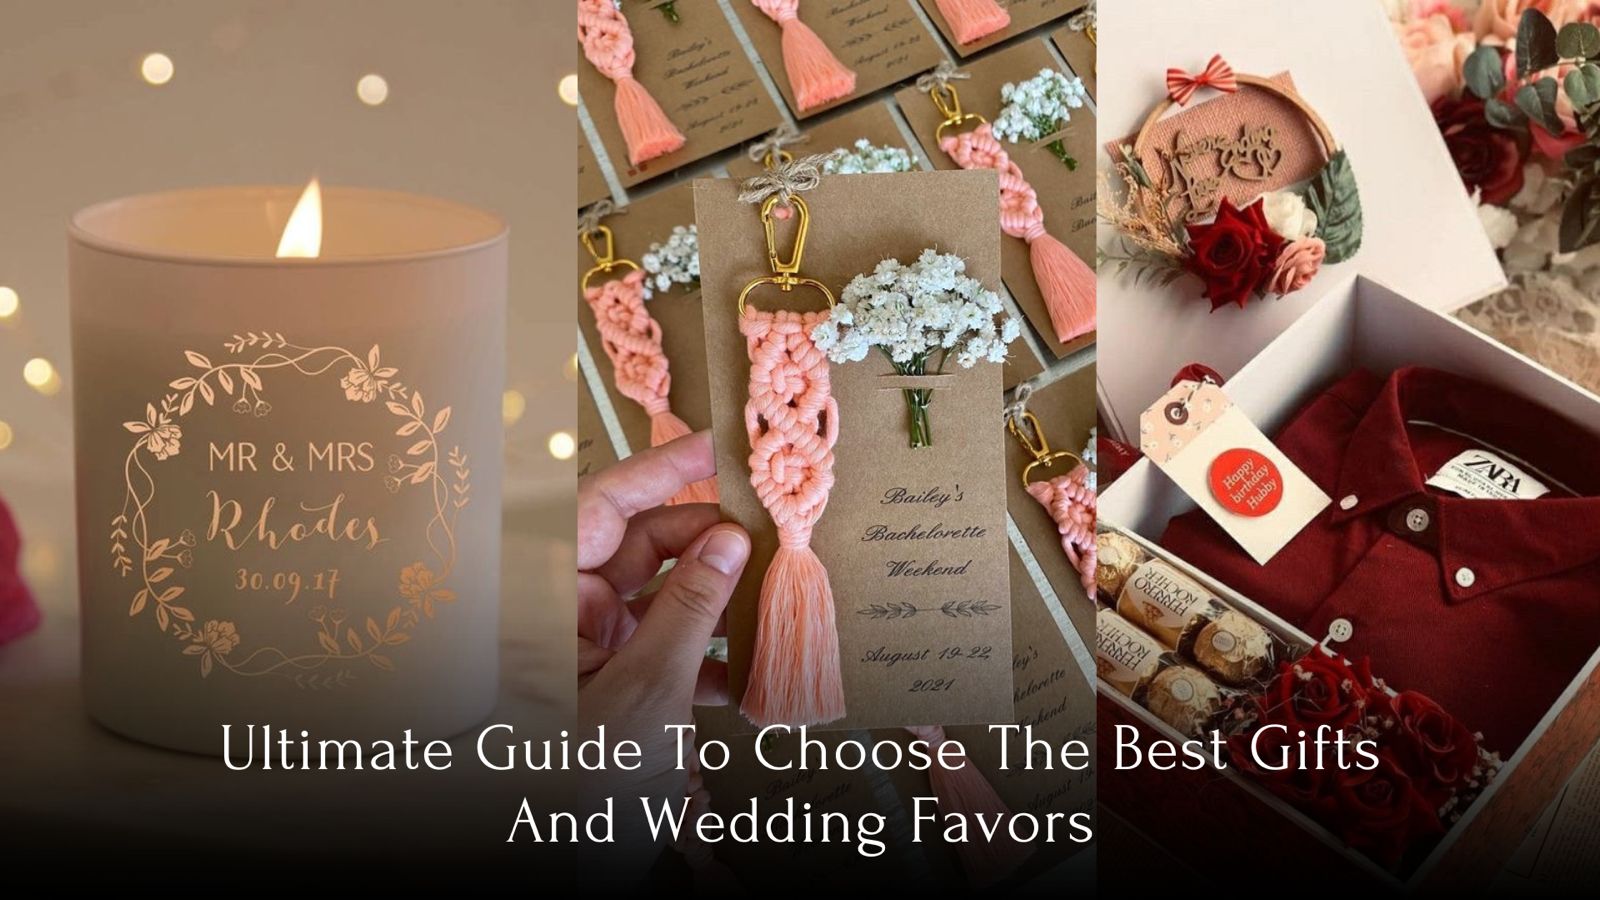 Ultimate Guide To Choose The Best Gifts And Wedding Favors